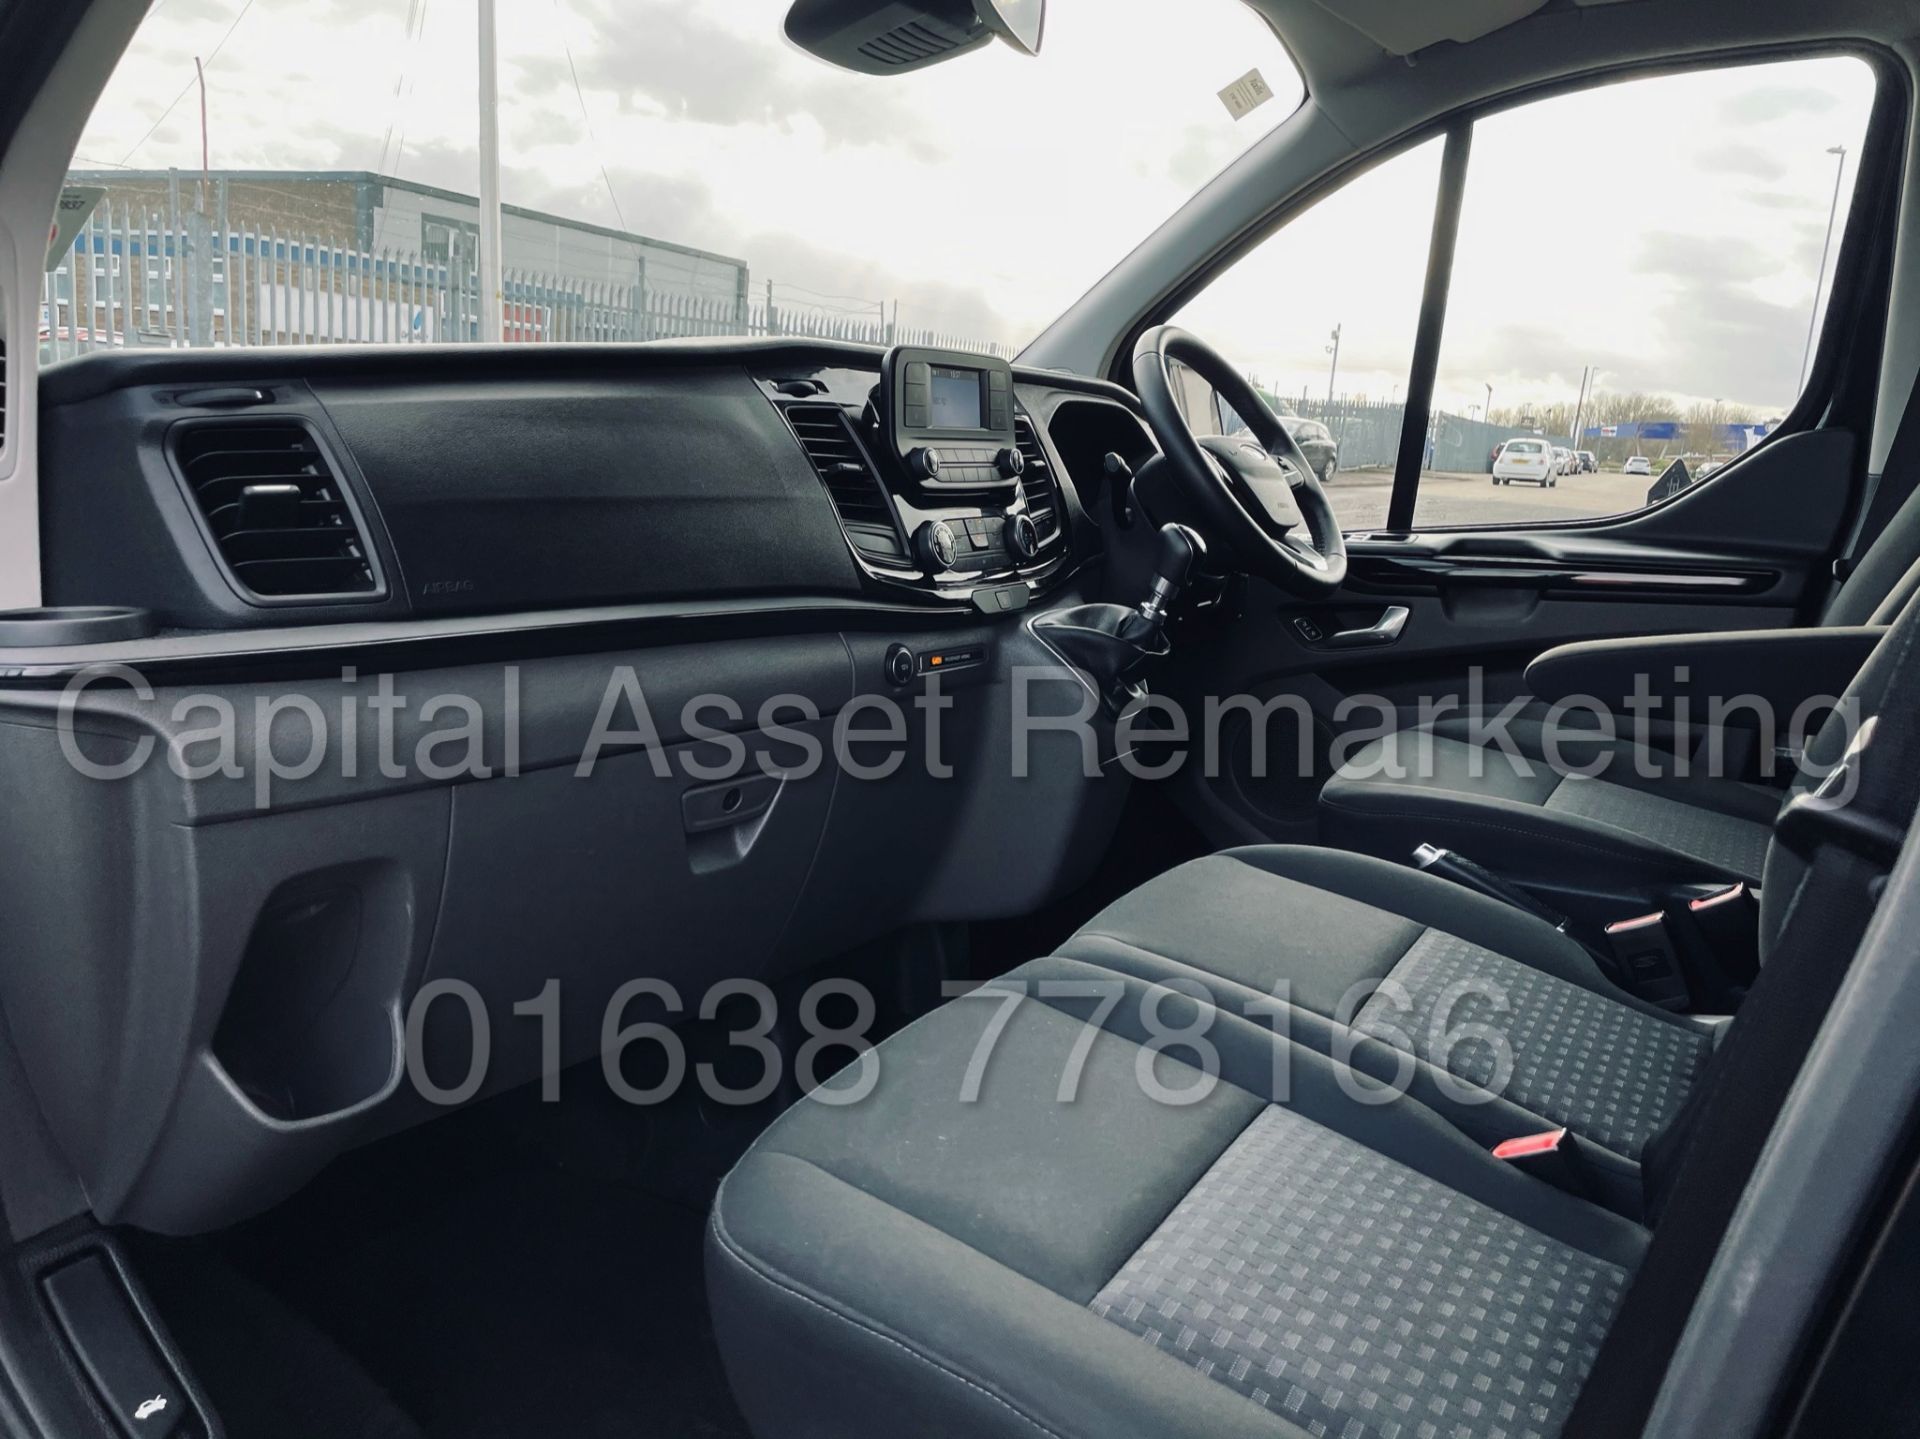 (On Sale) FORD TRANSIT CUSTOM TOURNEO *9 SEATER MPV / BUS* (2019) '2.0 TDCI - 130 BHP' (1 OWNER) - Image 18 of 46